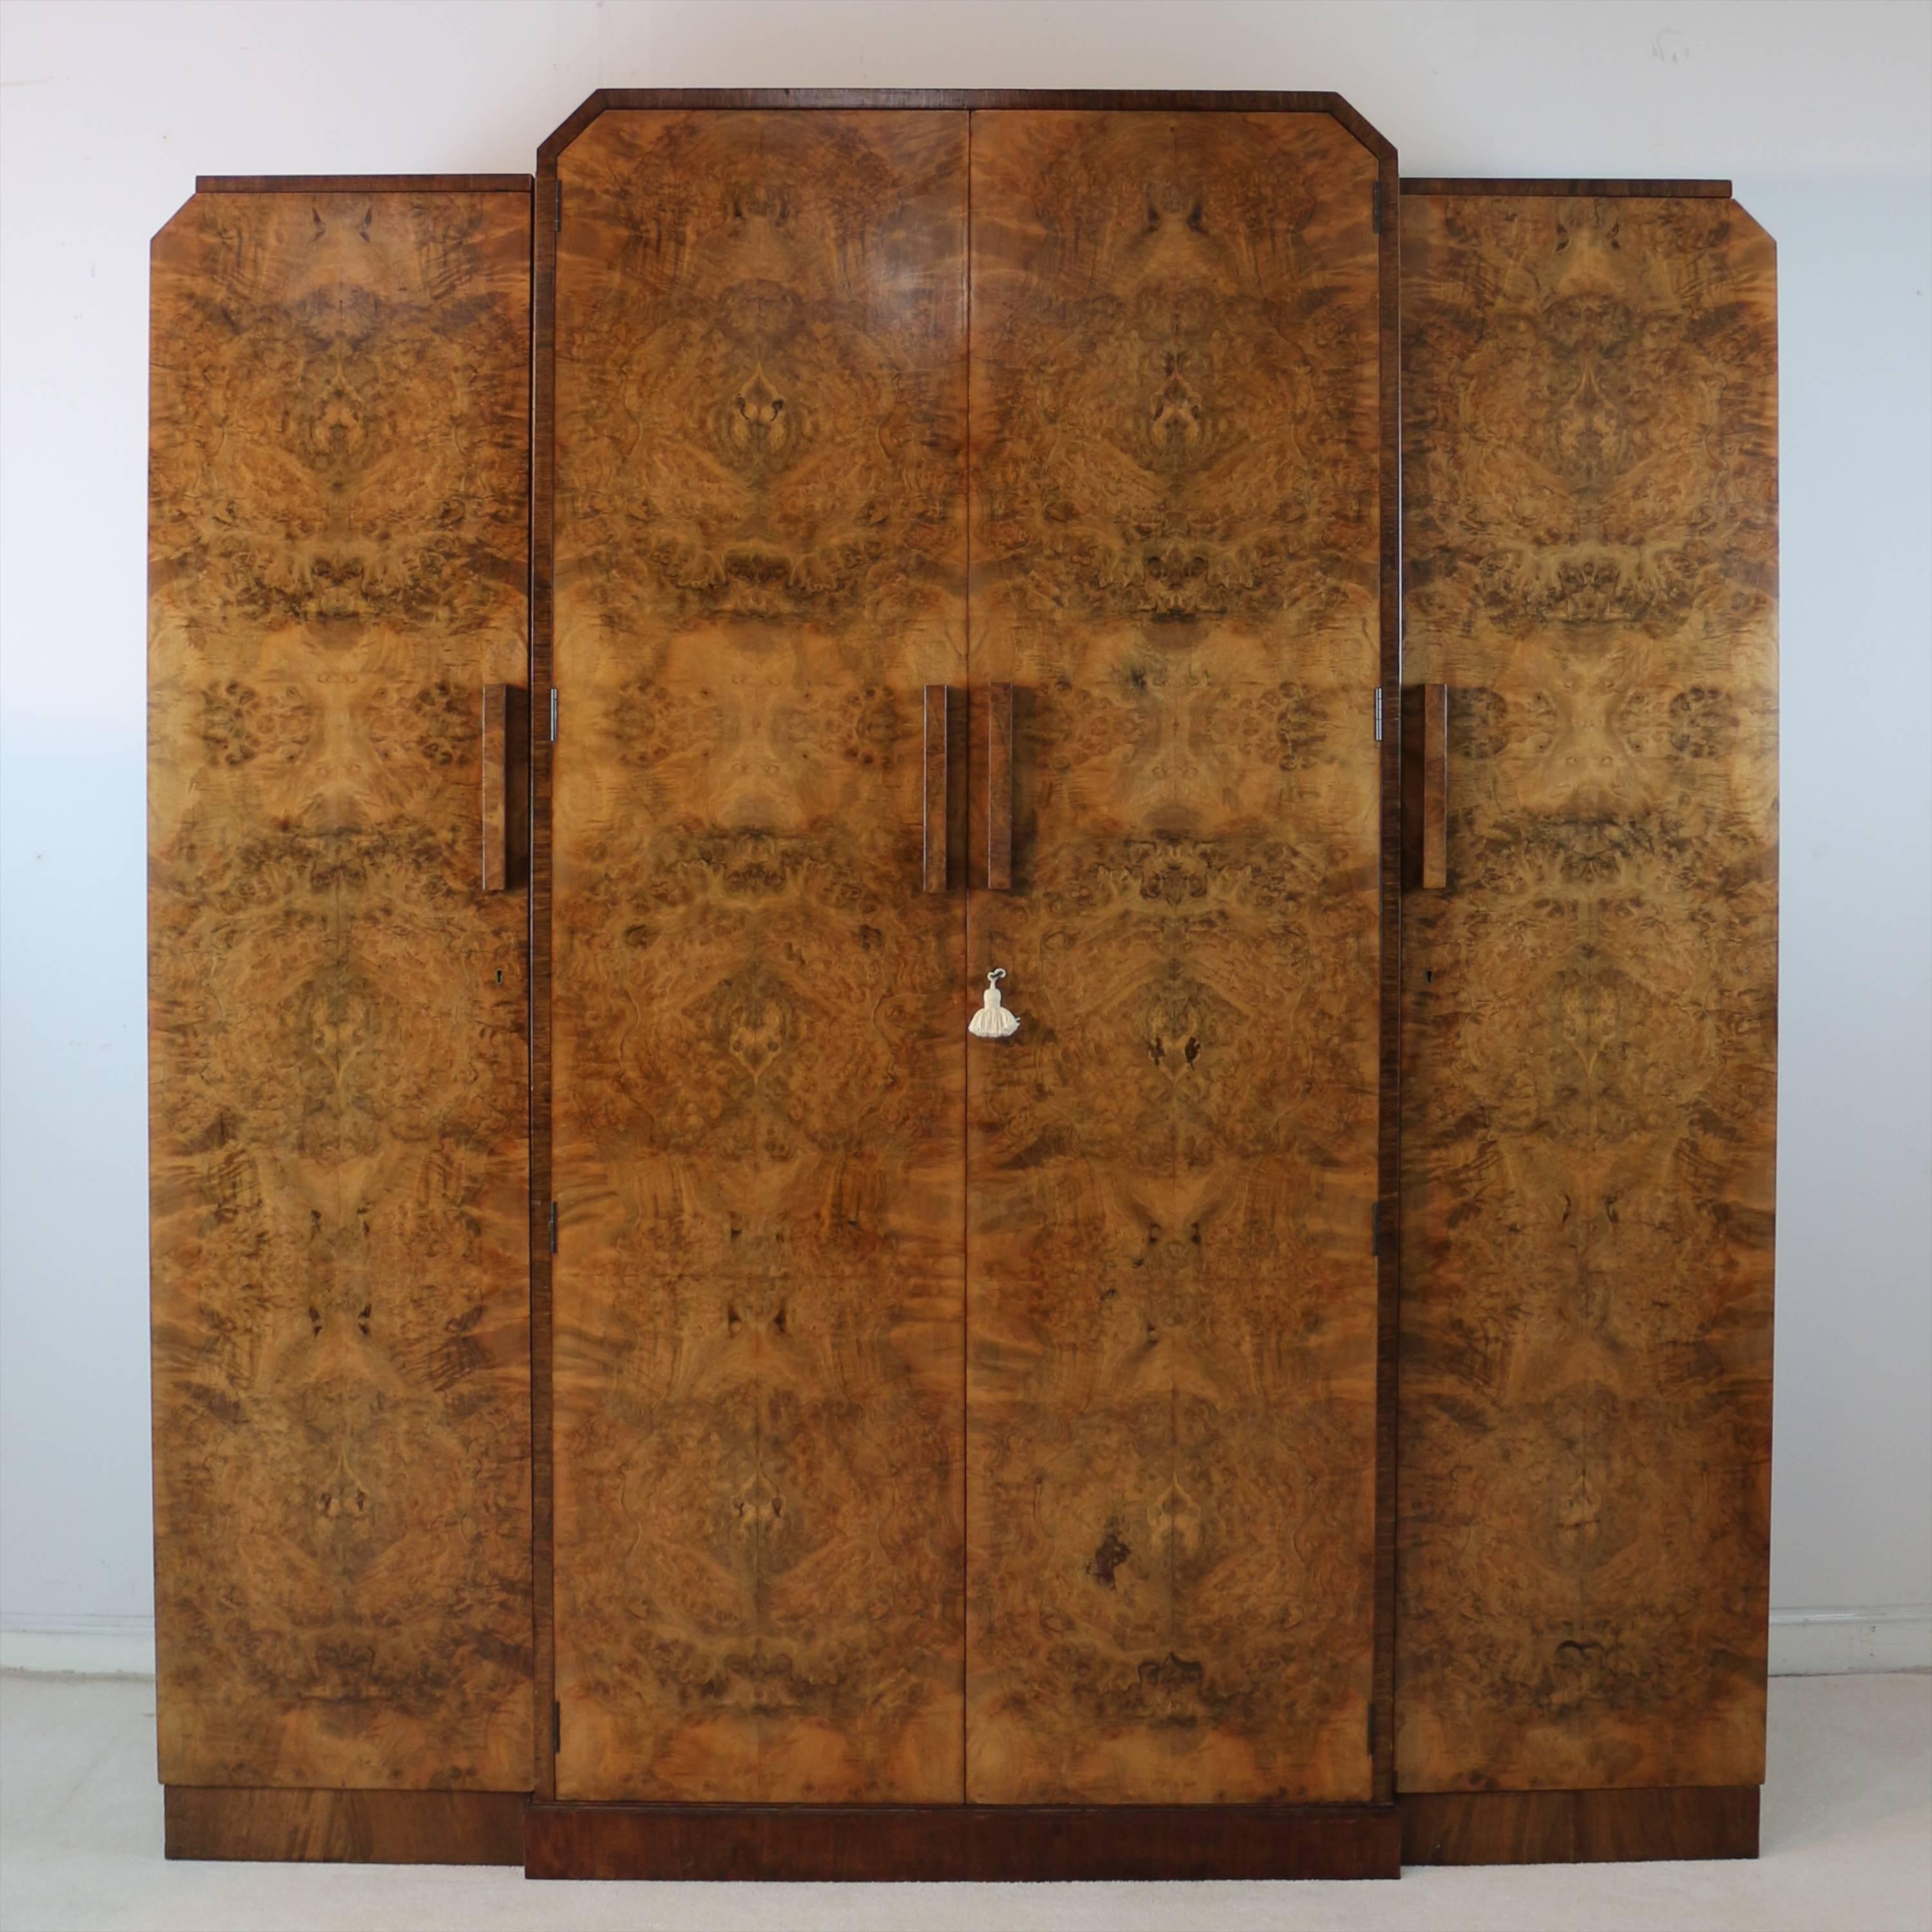 An English Art Deco four-piece burr walnut and rosewood crossbanded bedroom suite attributed to H & L Epstein and dating to circa 1925. Typically stylish and of superb quality it comprises:

A four-door fitted wardrobe with a rare additional